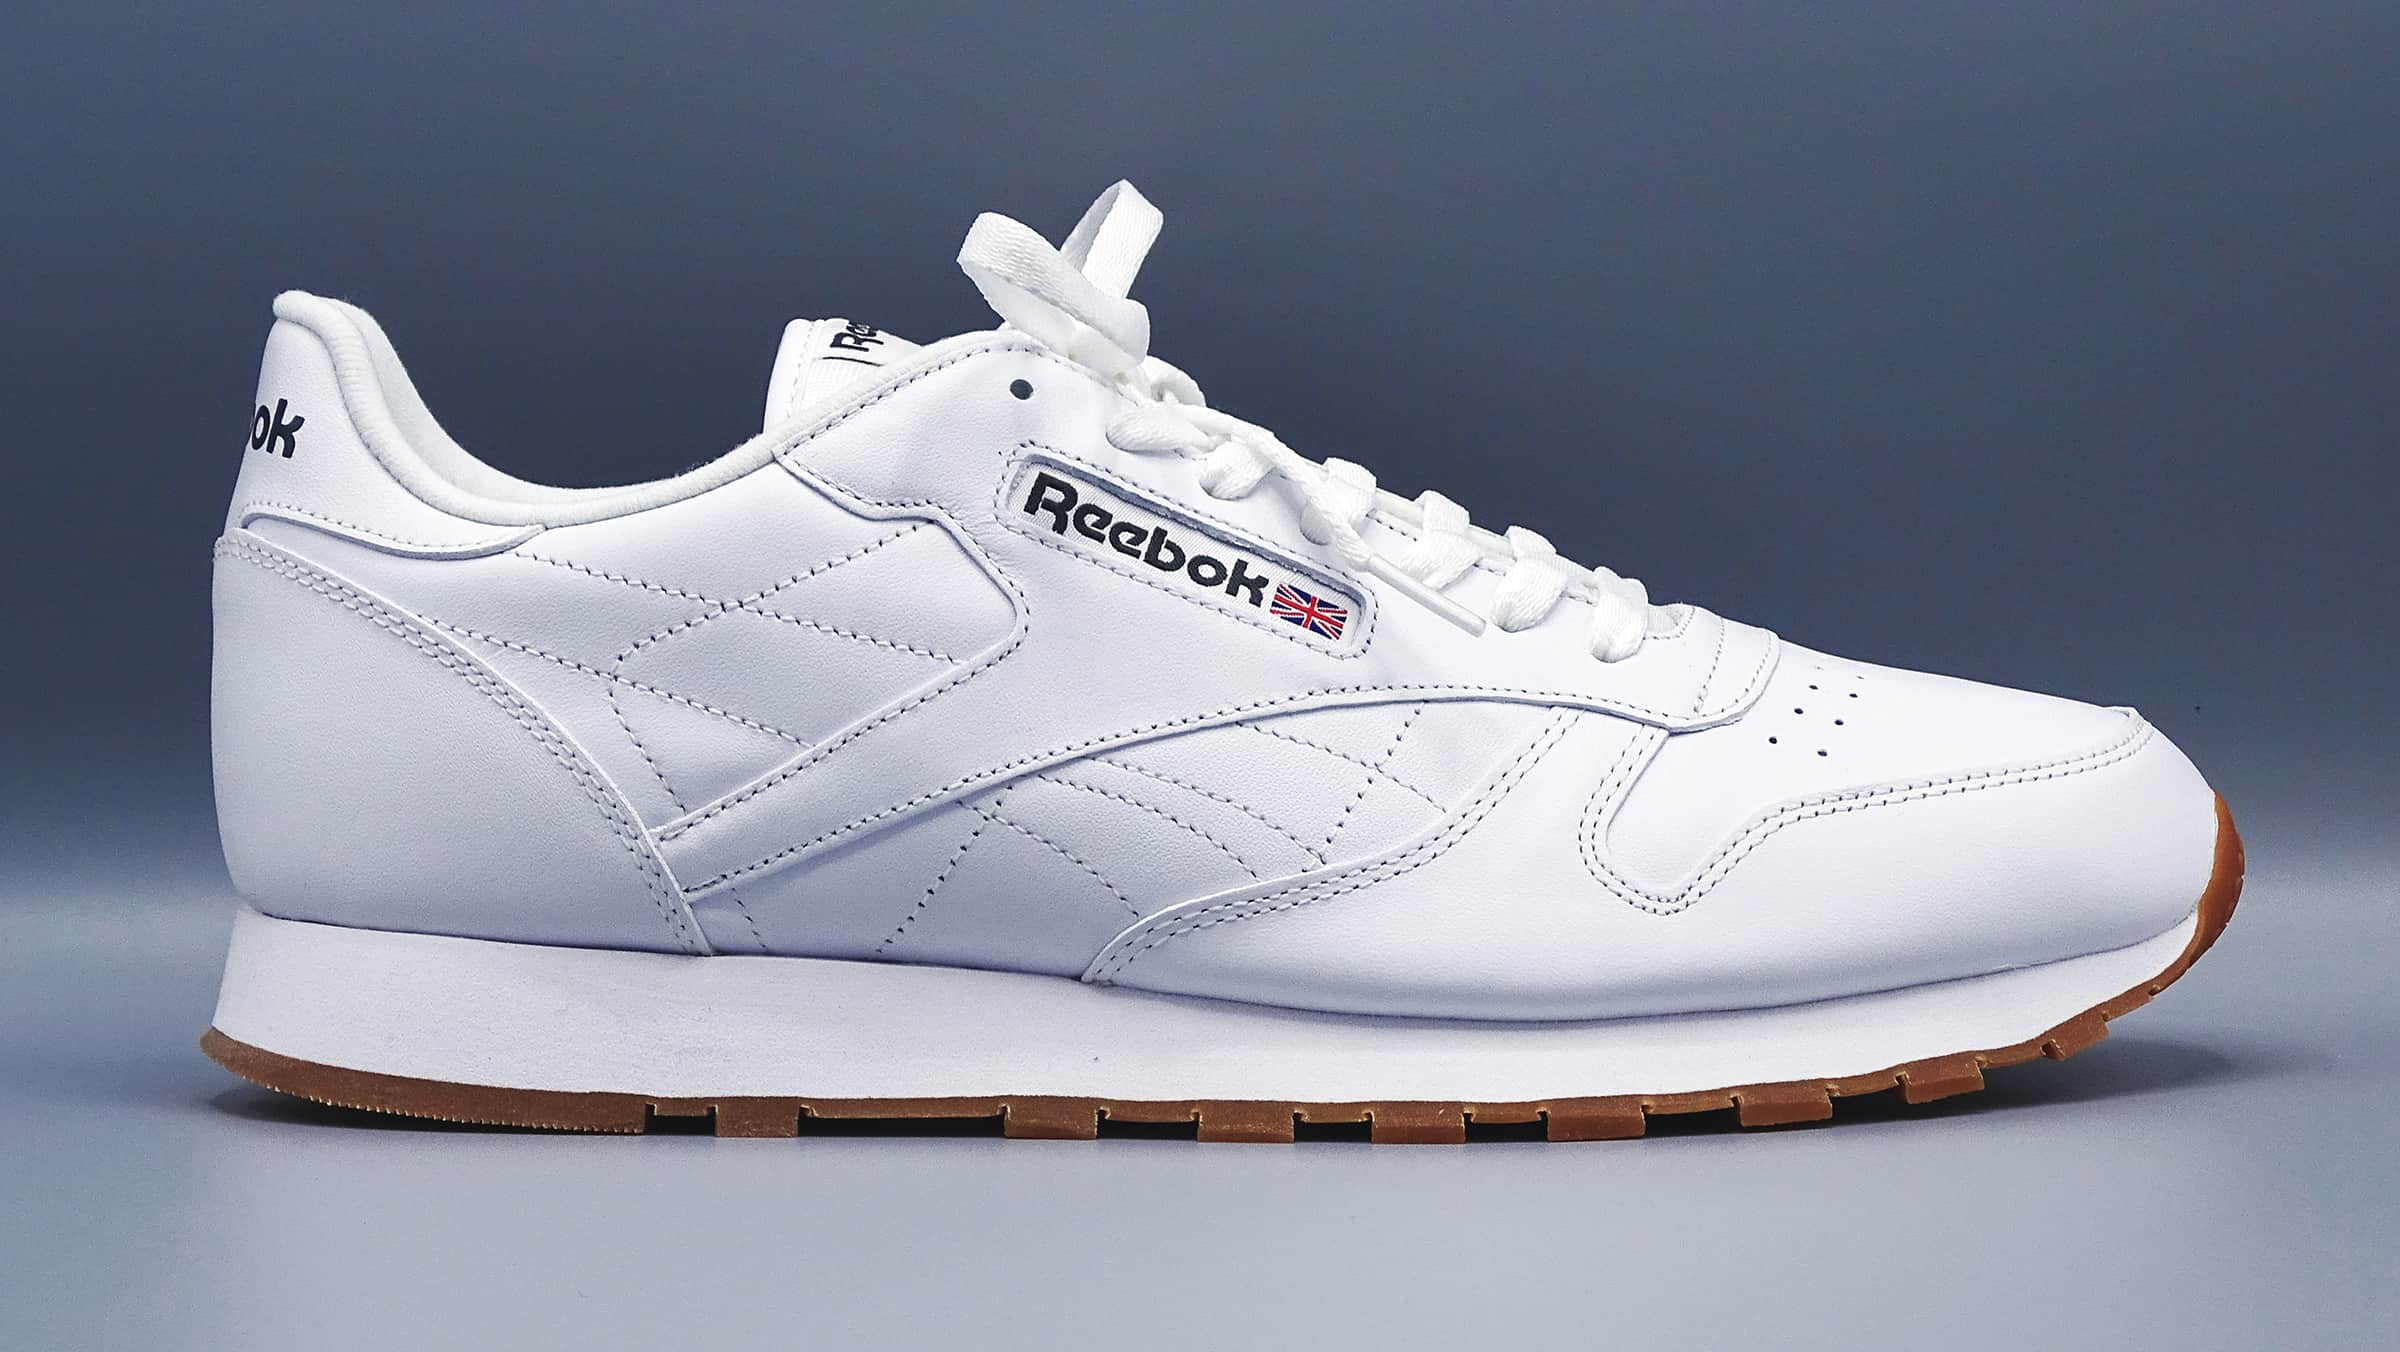 White reebok men's classic sneaker with gum colored bottom